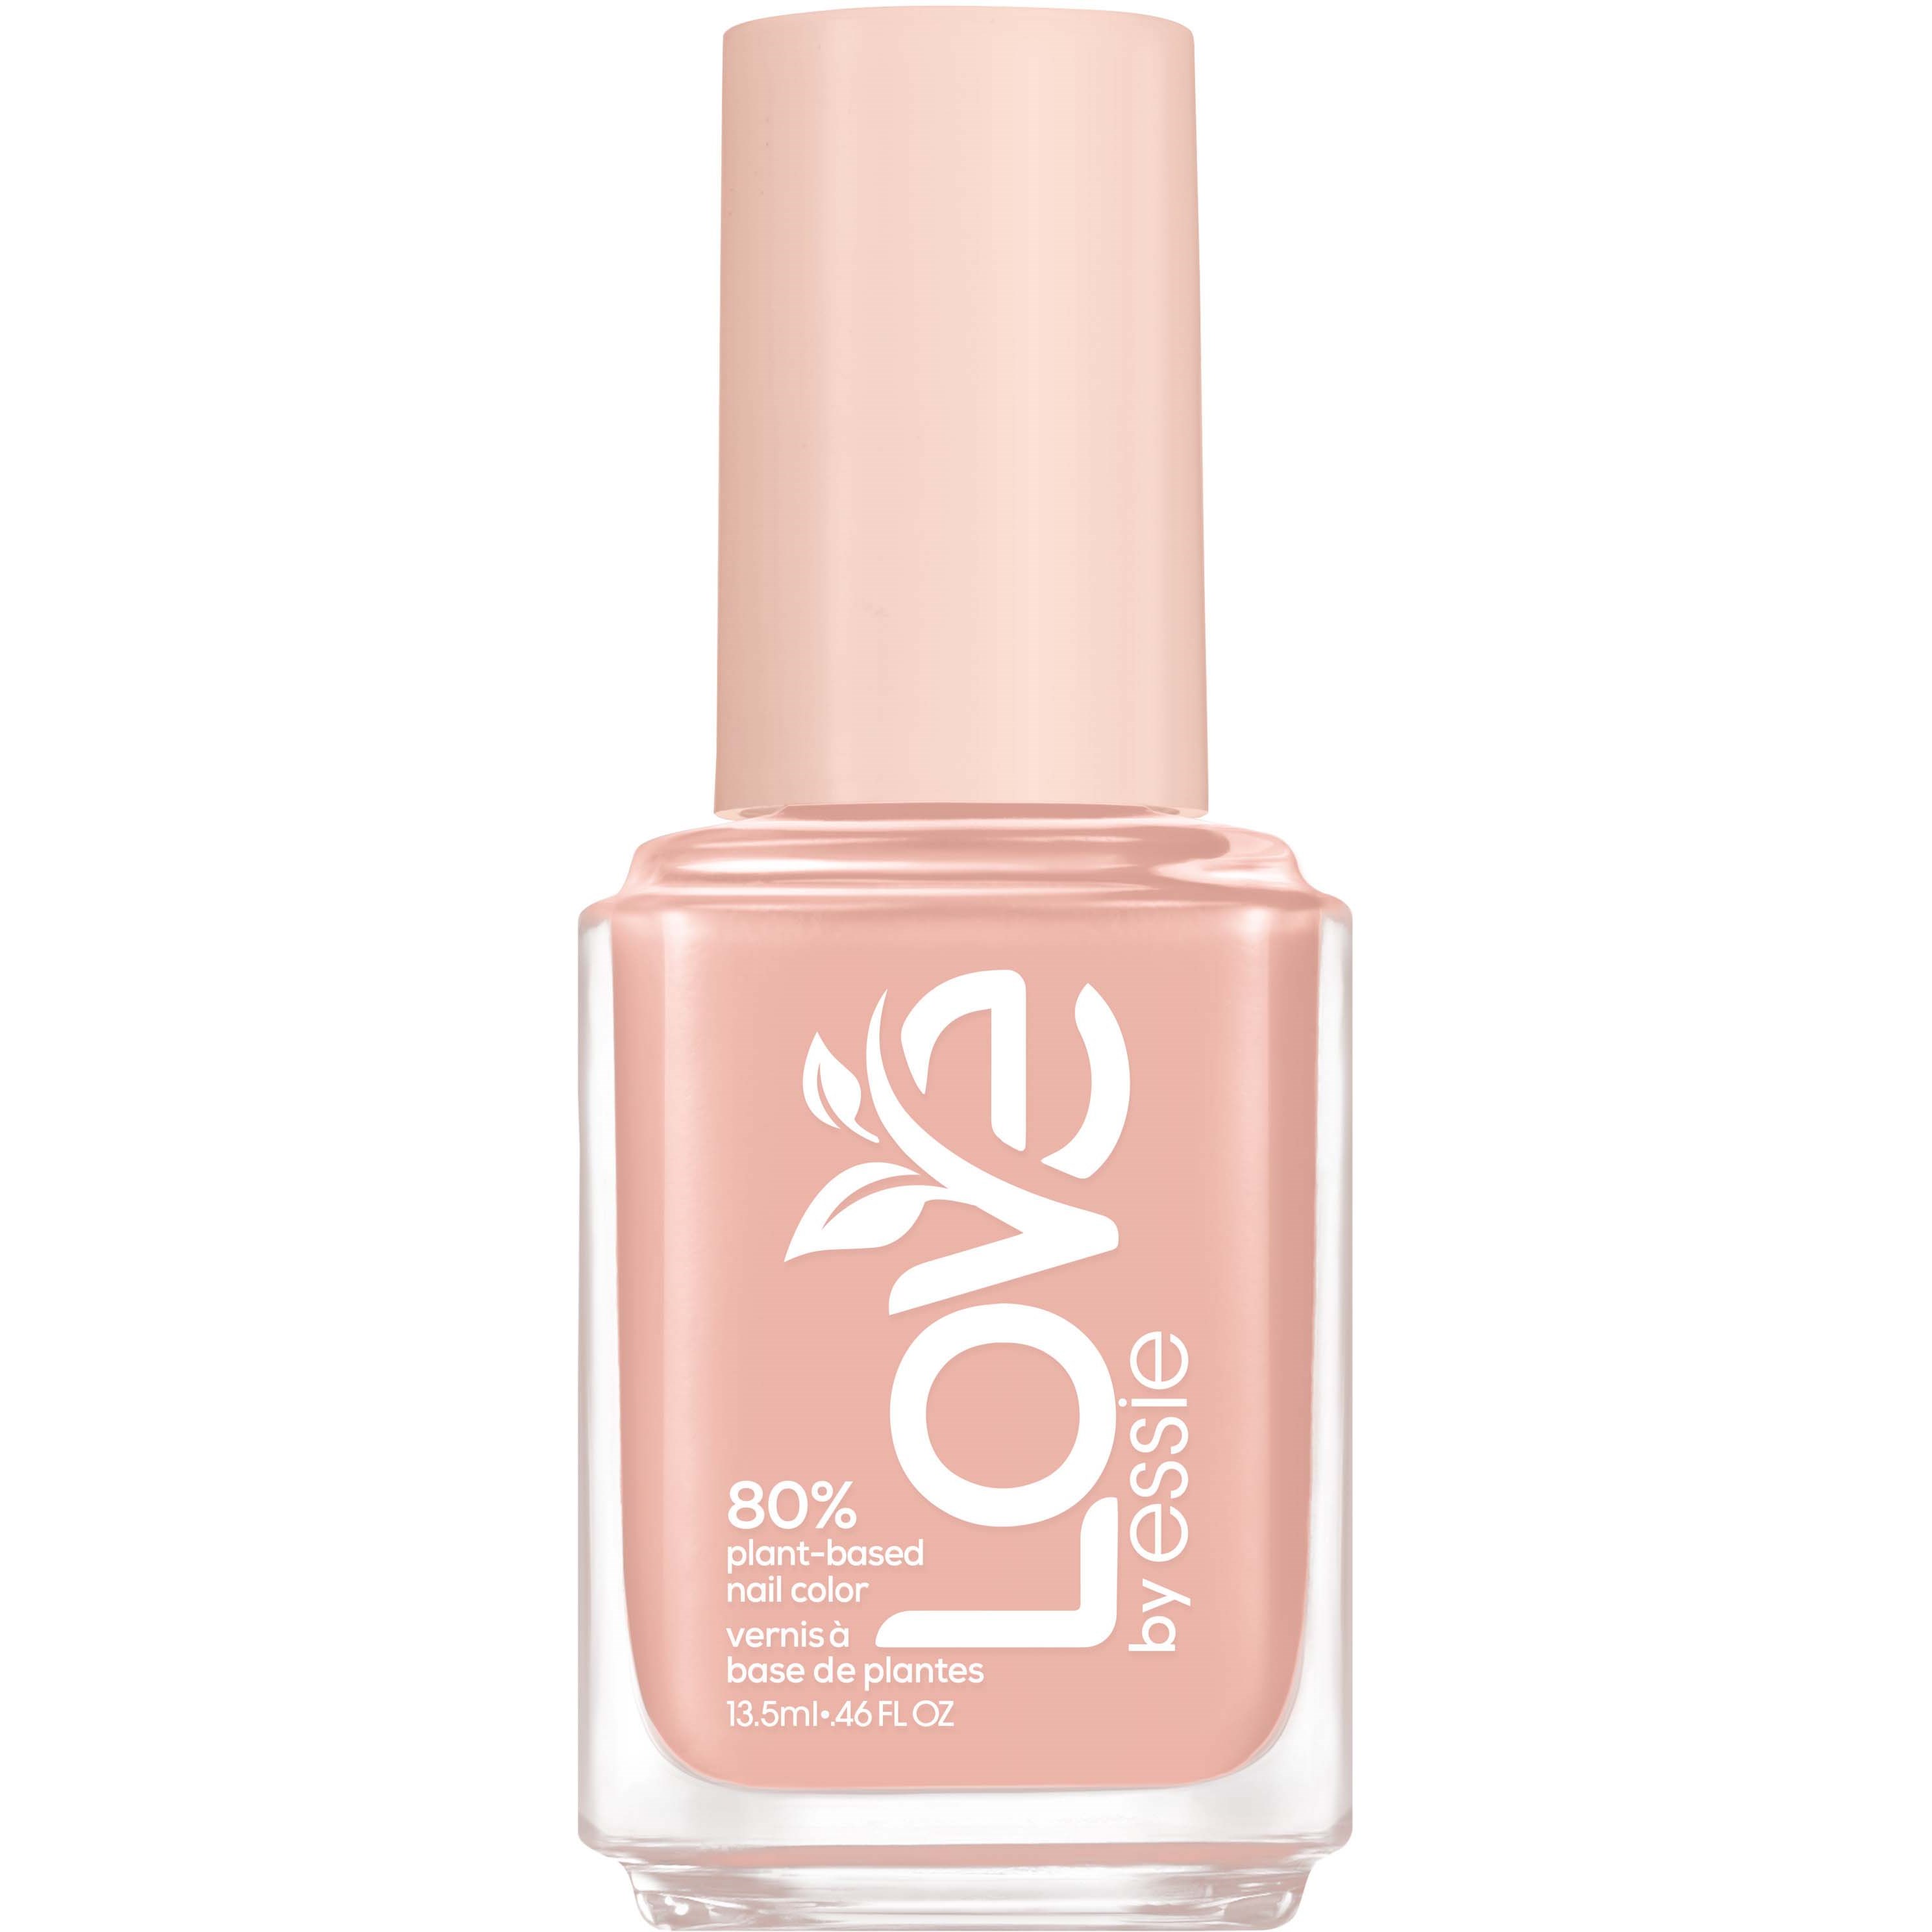 Essie LOVE by Essie 80% Plant-based Nail Color 10 Back To Essie Love